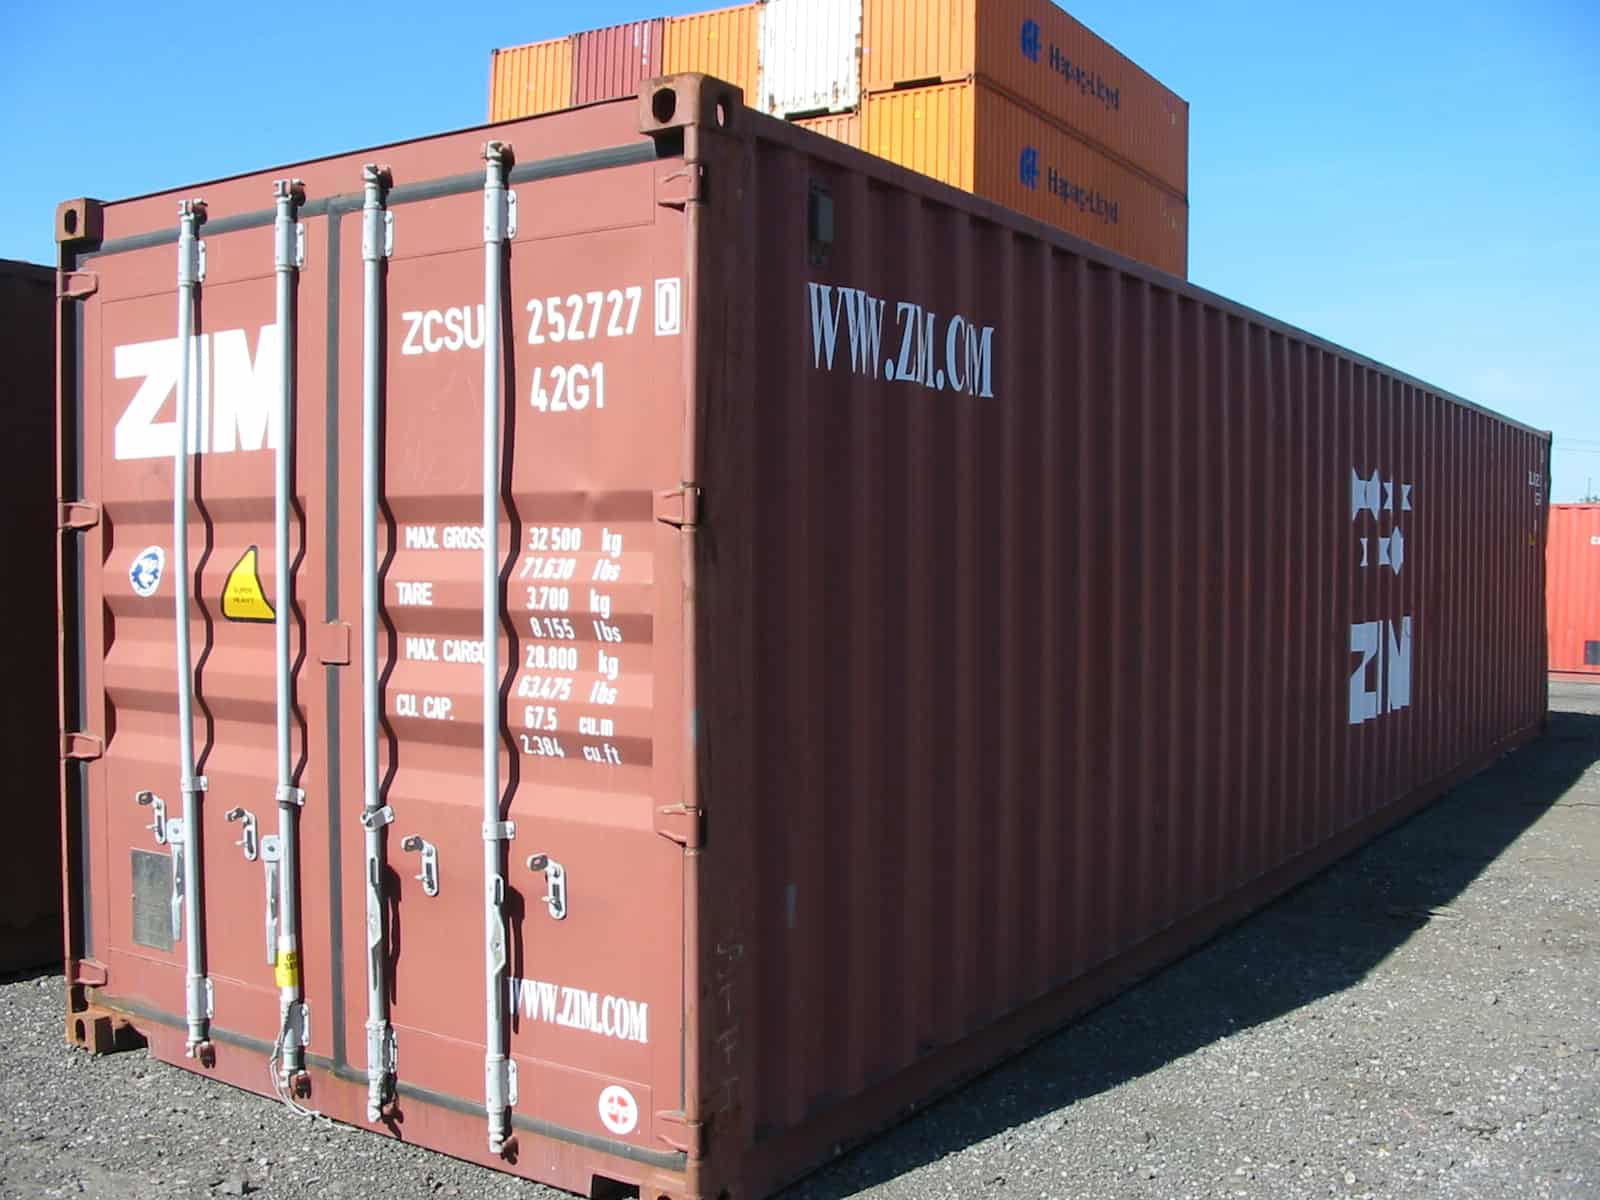 https://cdn.cmgcontainers.net/uploads/product-gallery-images/40-dv-used-shipping-container.JPG